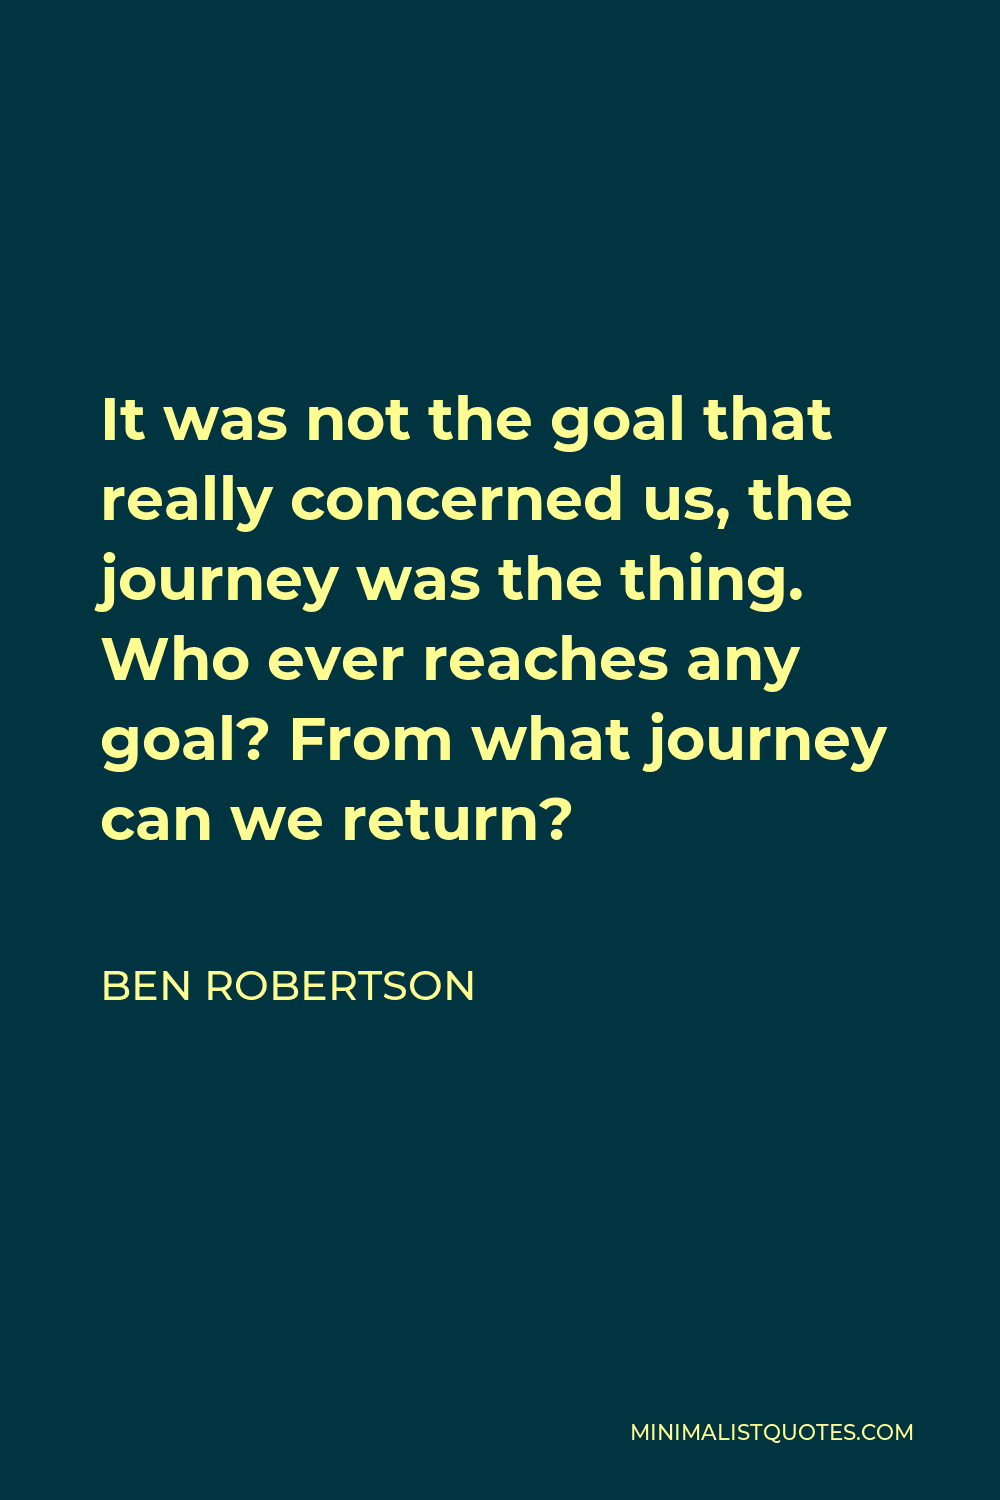 Ben Robertson Quote - It was not the goal that really concerned us, the journey was the thing. Who ever reaches any goal? From what journey can we return?